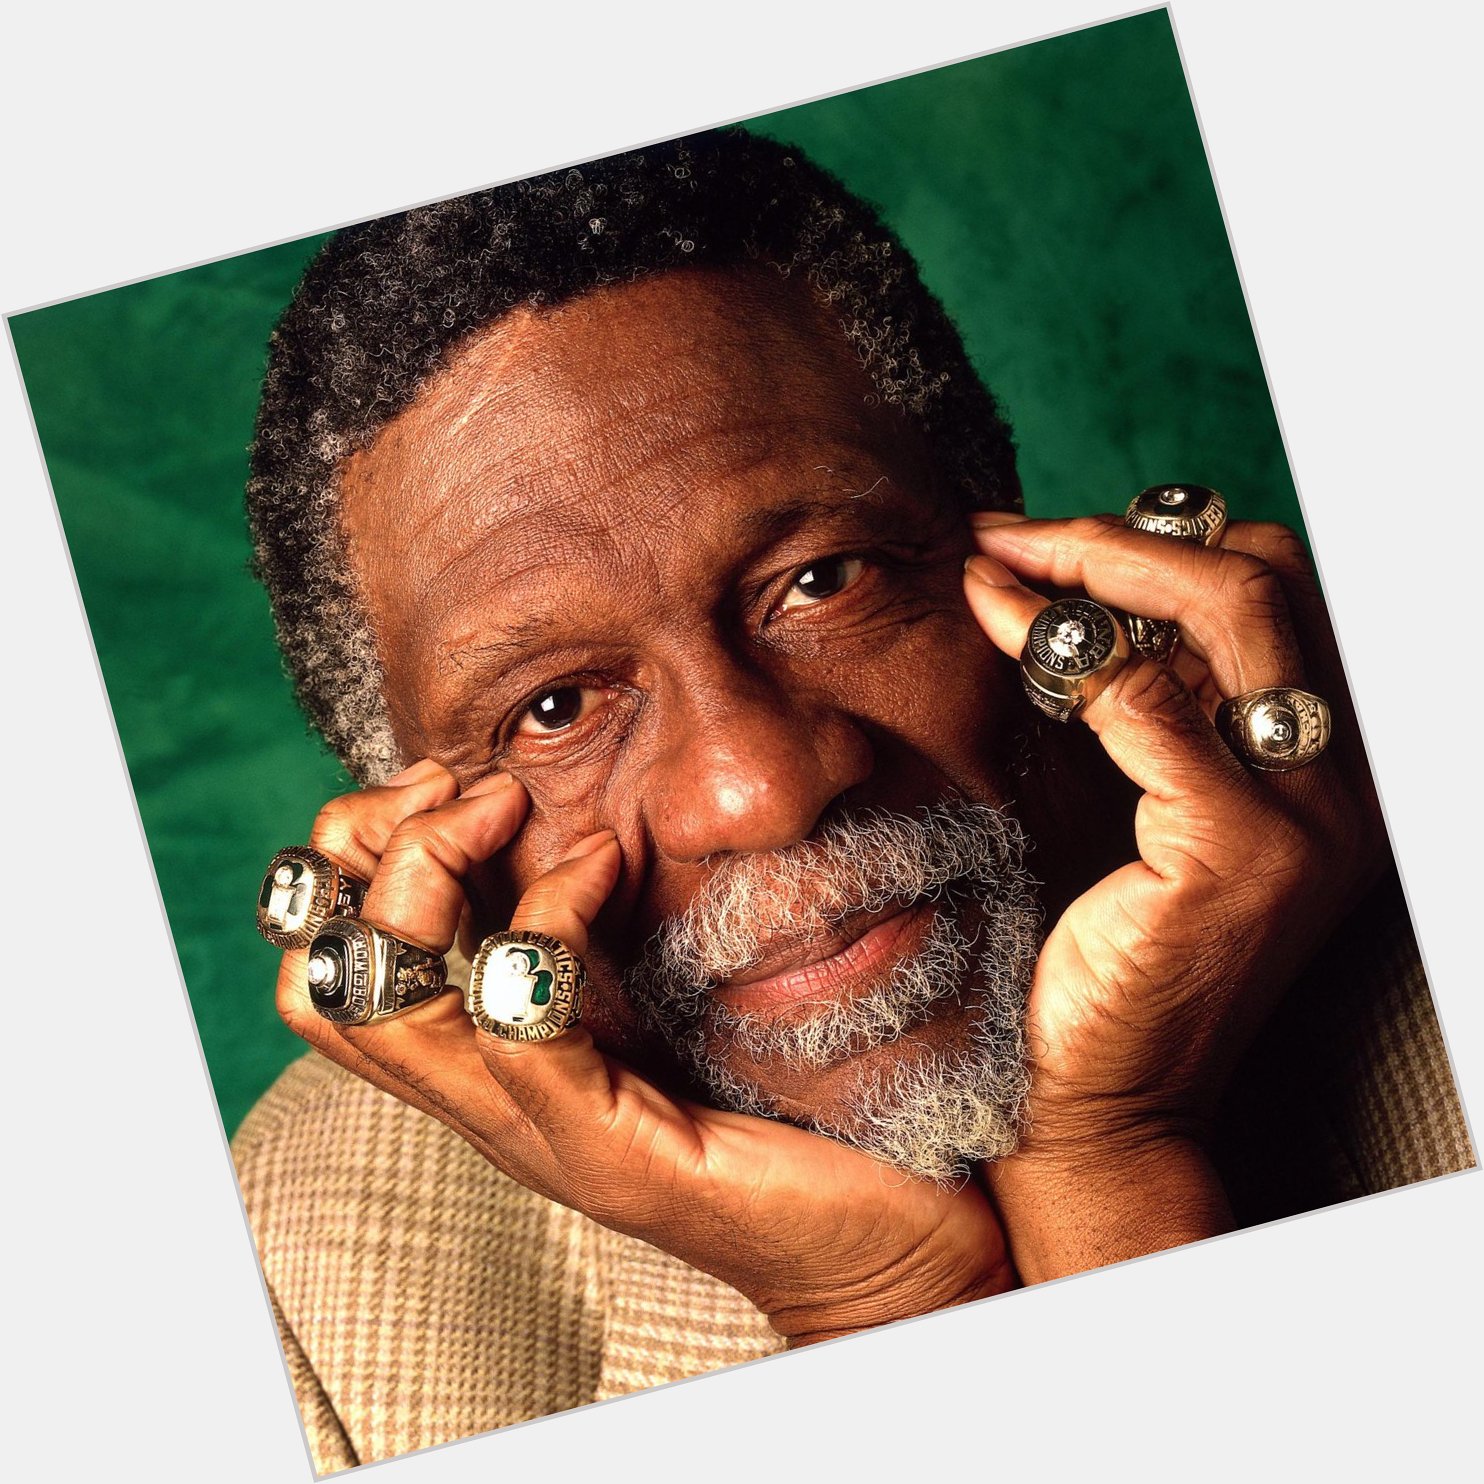 \" Happy Birthday to 11x NBA Champion Bill Russell! not enough fingers for those rings